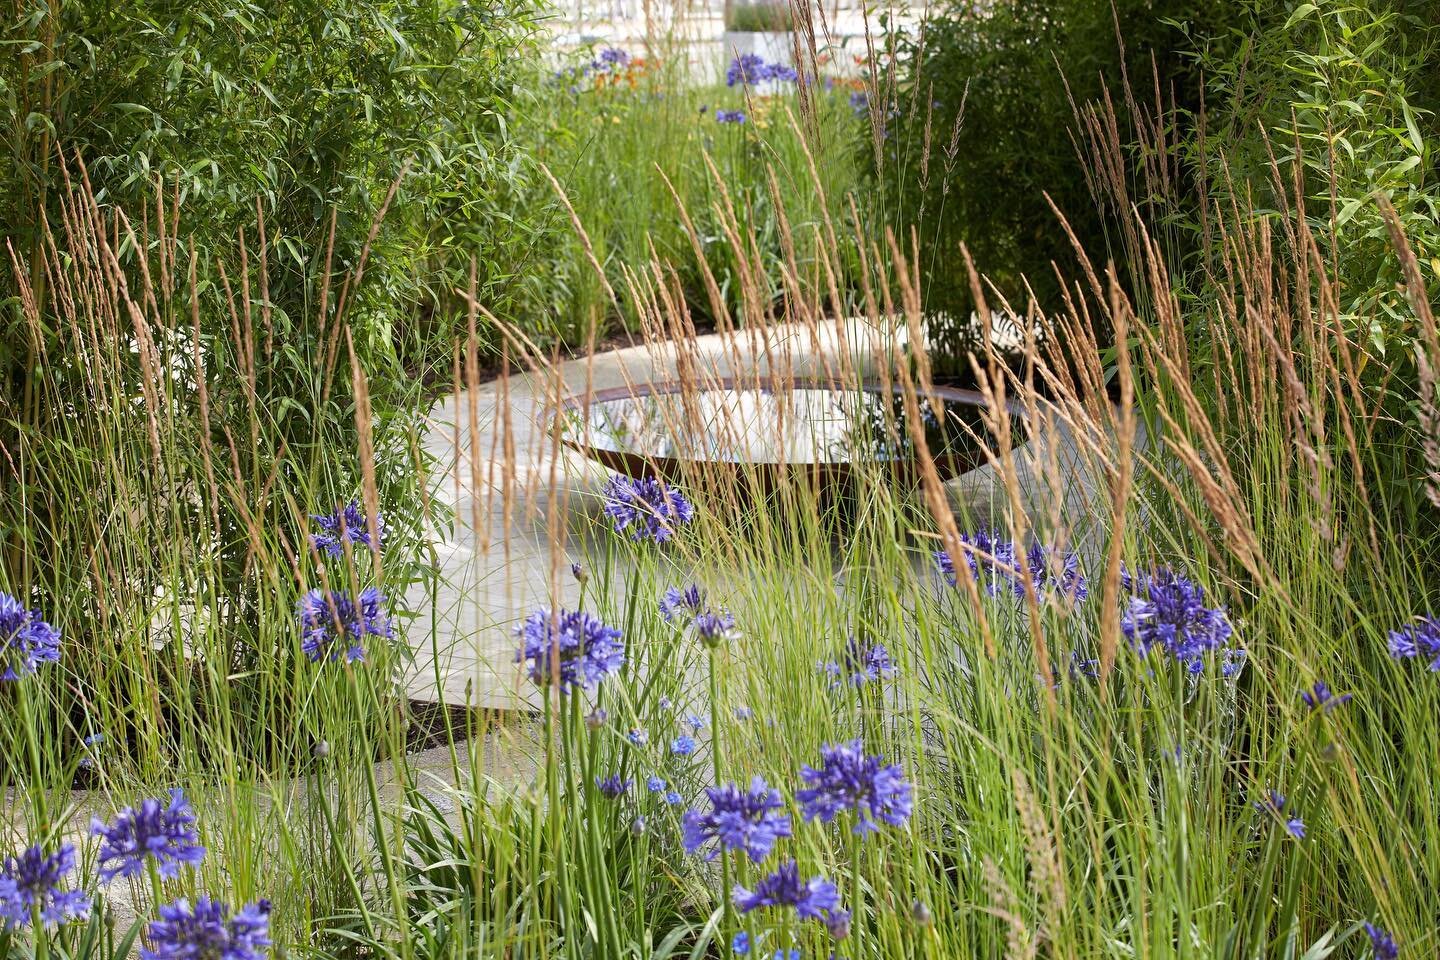 @the_rhs Show Garden Number 2:

🌸The Perennial Sanctuary Garden 
🌿RHS Hampton Court Palace Flower Show 2017 
🏅Silver-Gilt Medal

This show garden was designed to raise awareness of Perennial, Gardeners&rsquo; Royal Benevolent Society, the UK&rsquo